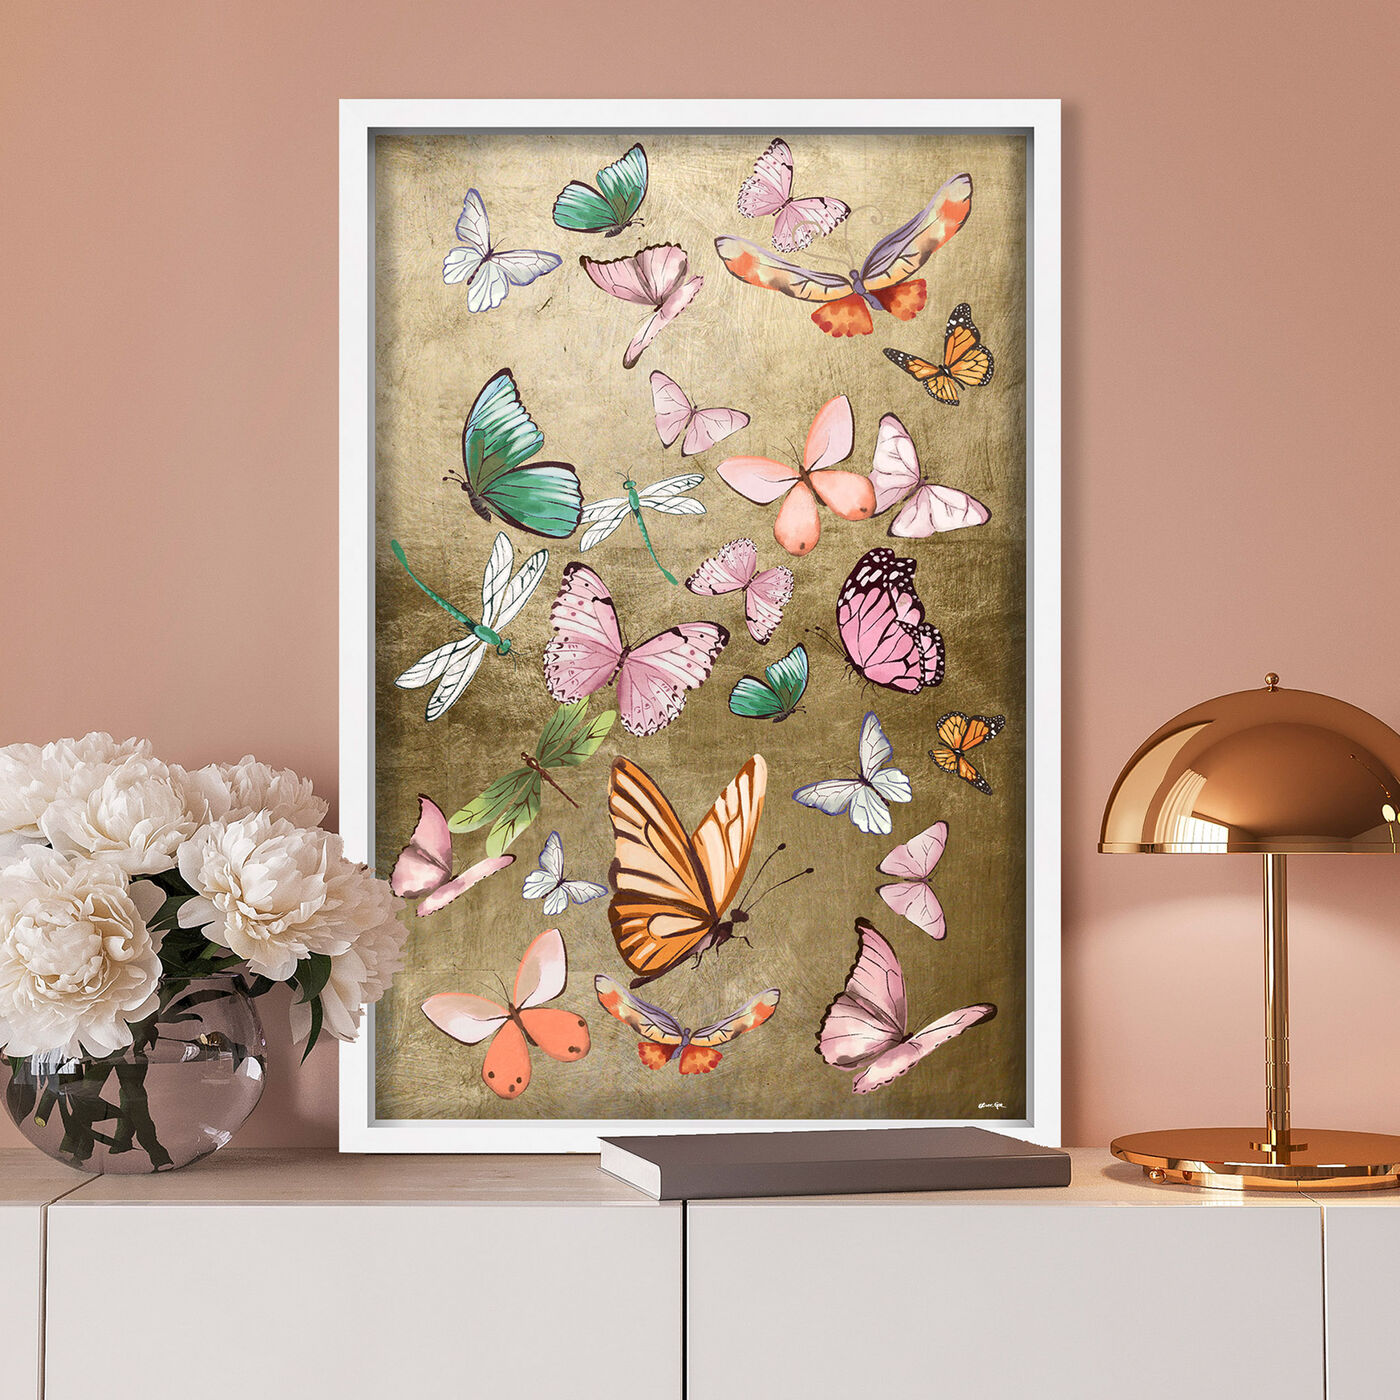 Gold Leaf Oliver Art Animals by | - The Gold Gal With Over Flying Hand-Applied Wall